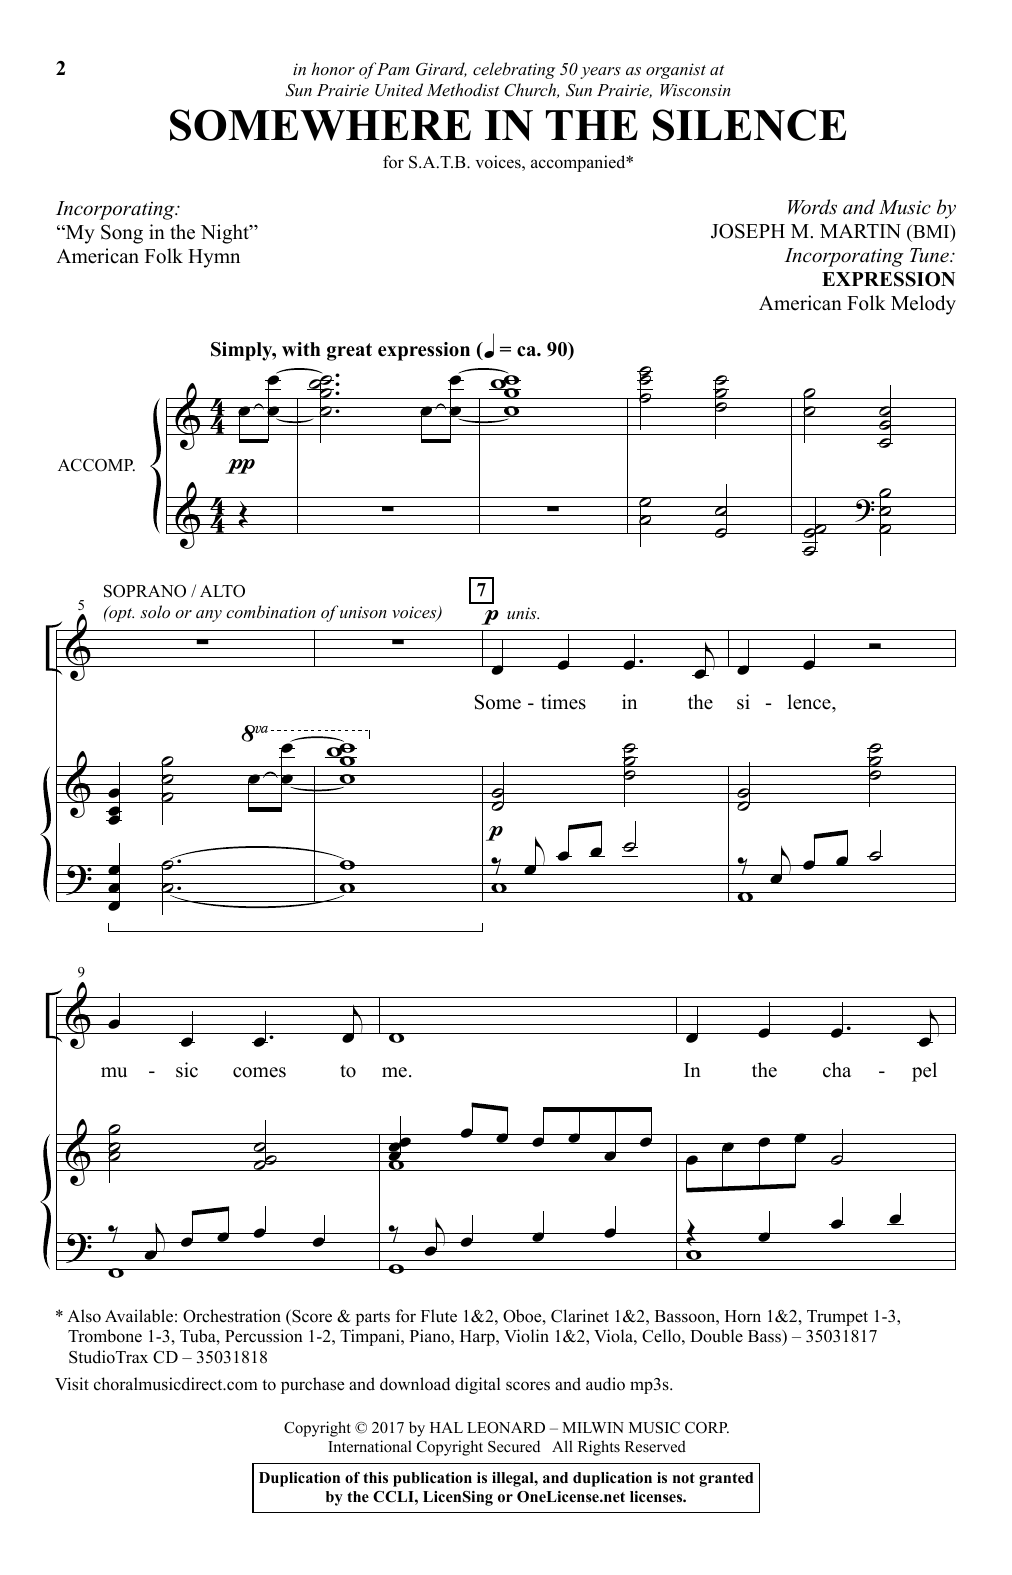 Download Joseph M. Martin Somewhere In The Silence Sheet Music